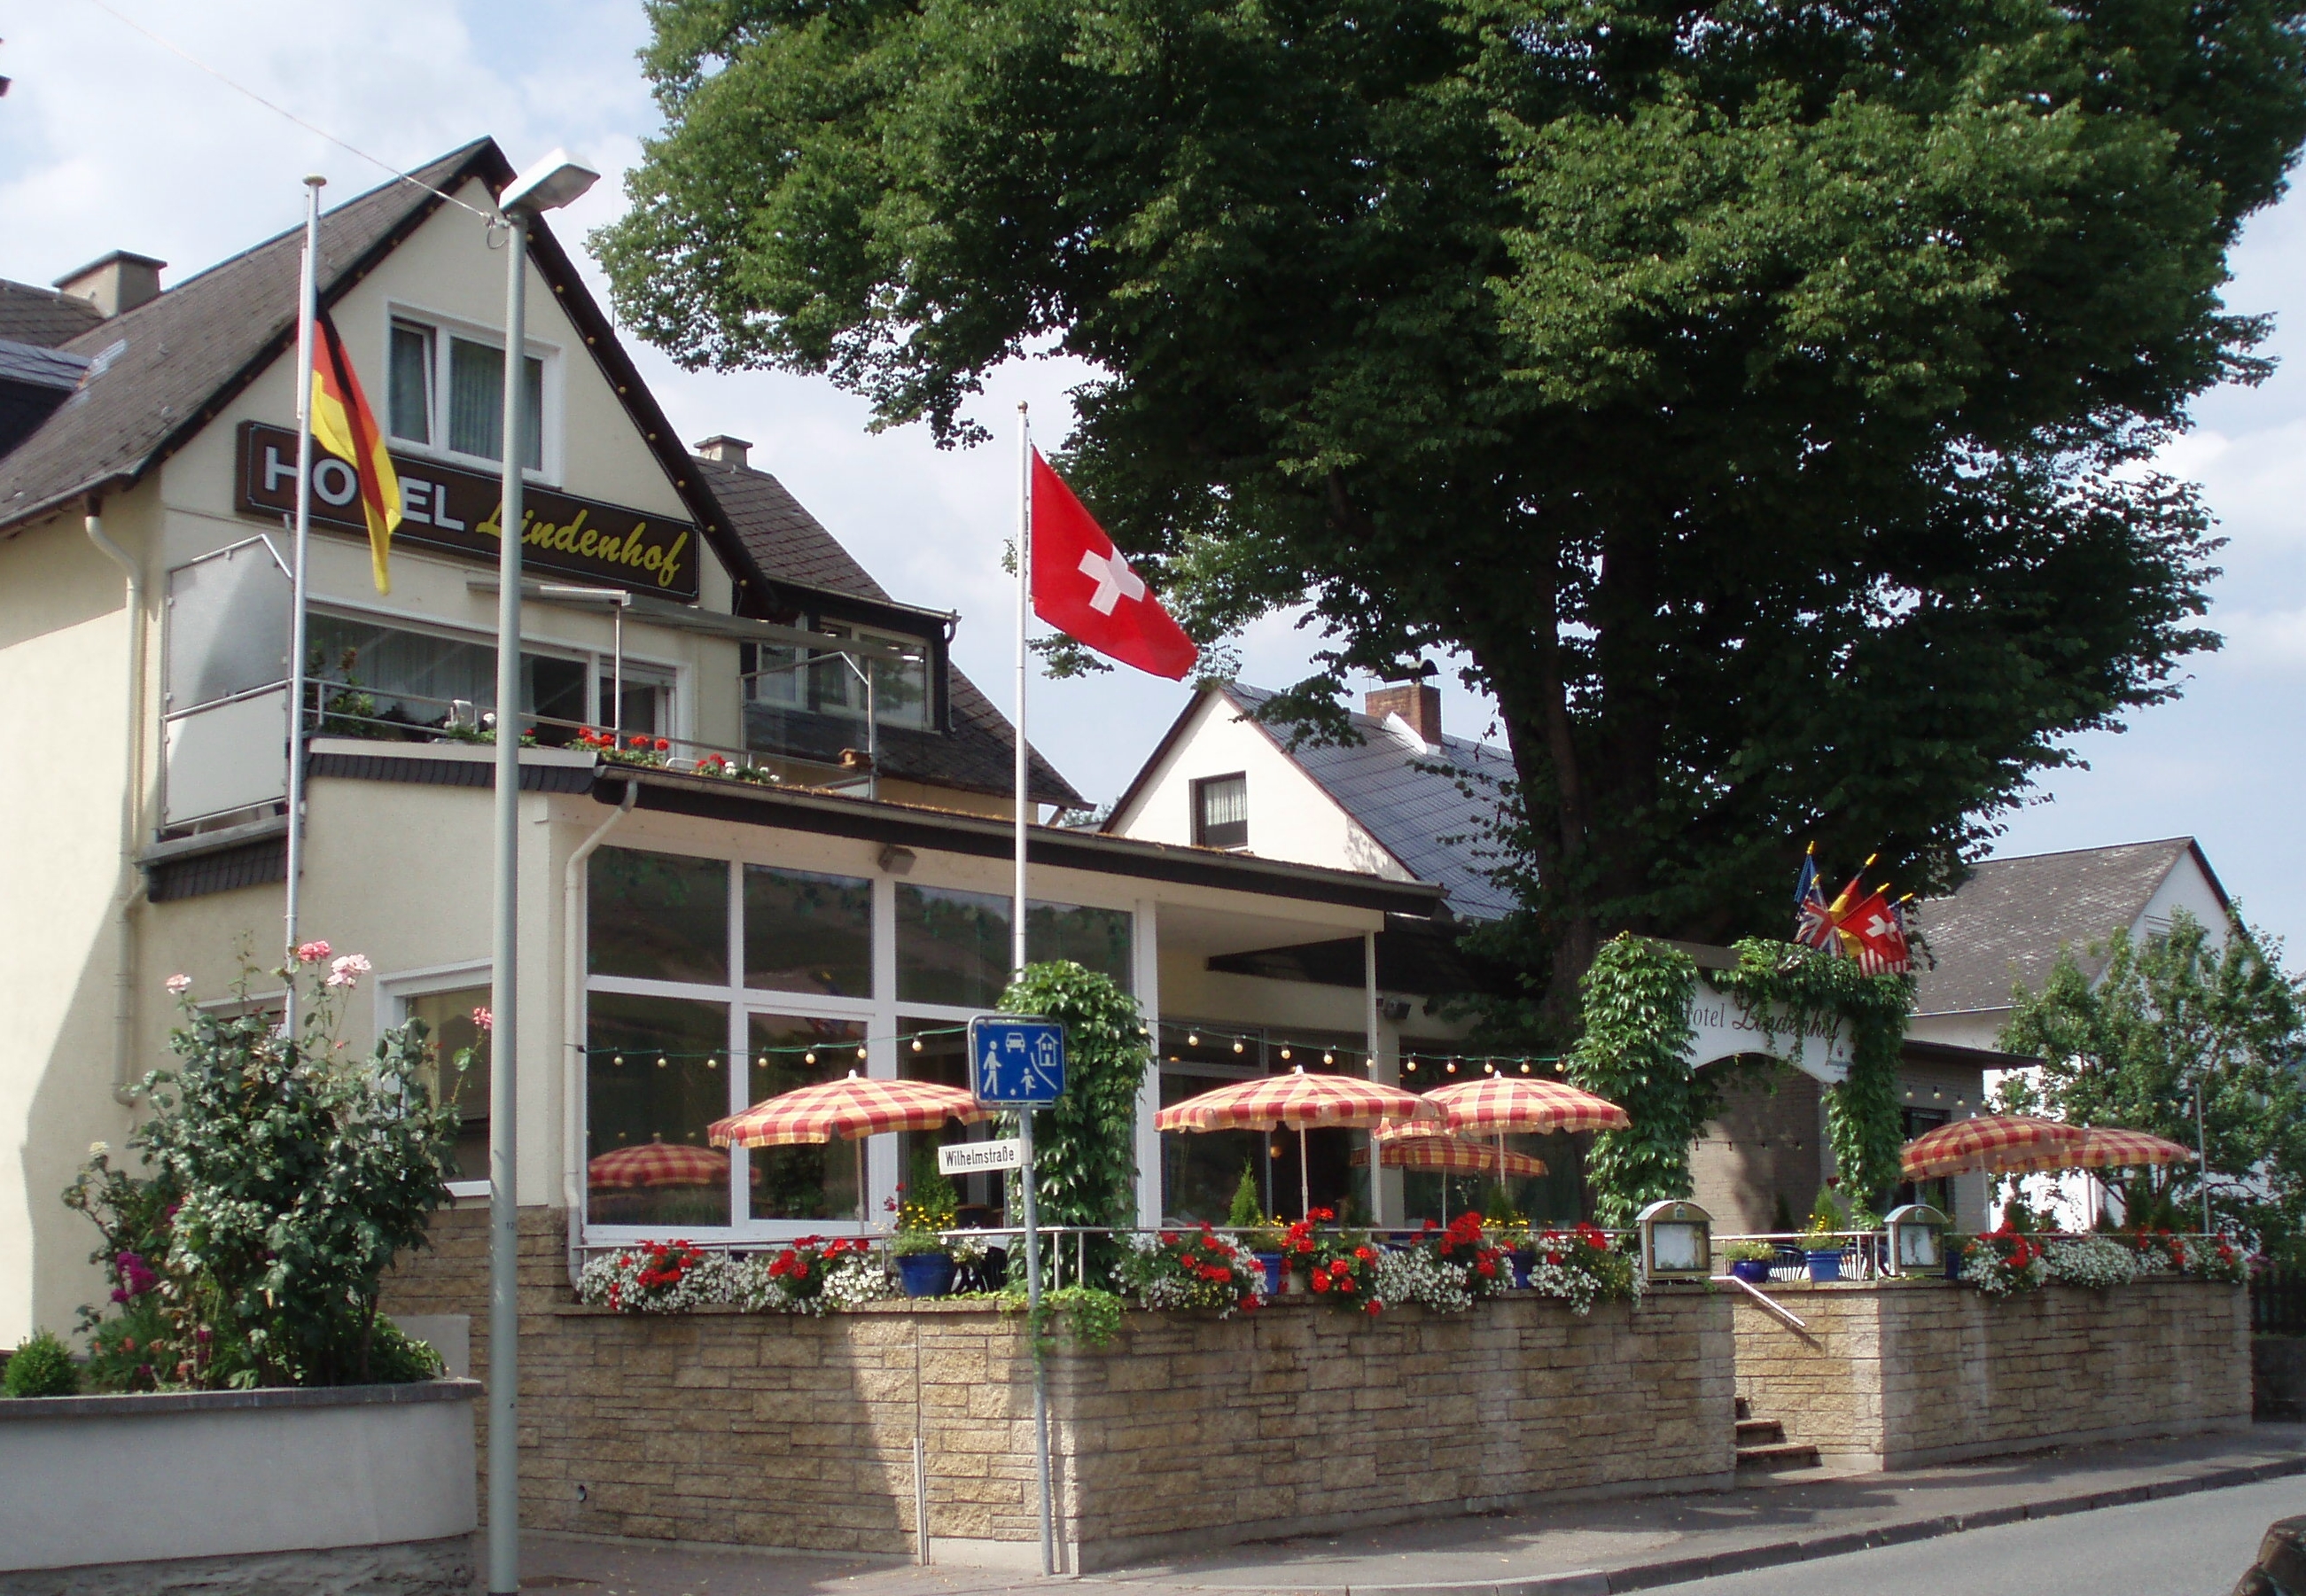 Hotel Lindenhof <br/>85.00 ew <br/> <a href='http://vakantieoplossing.nl/outpage/?id=2d92af87f08dad6f296c615985c76517' target='_blank'>View Details</a>